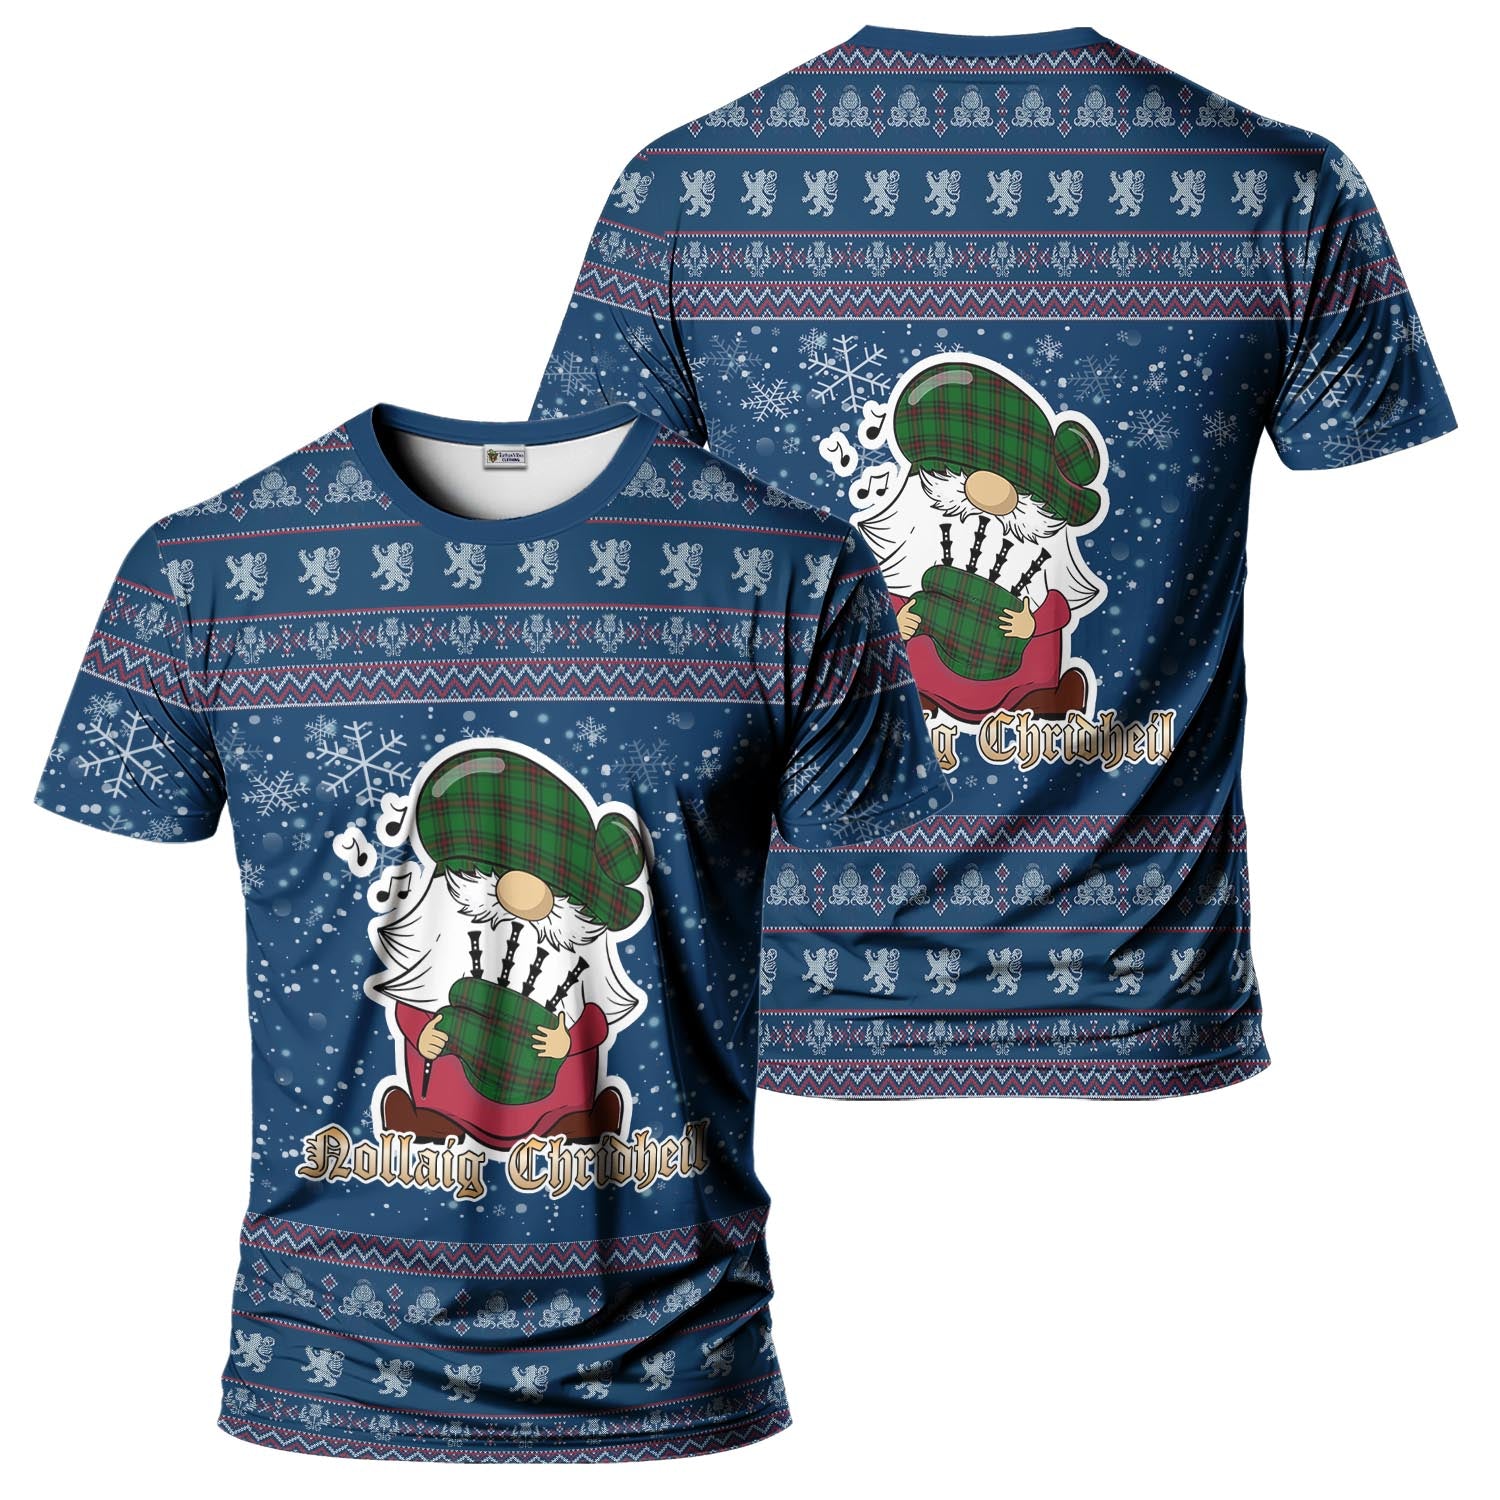 Primrose Clan Christmas Family T-Shirt with Funny Gnome Playing Bagpipes Kid's Shirt Blue - Tartanvibesclothing